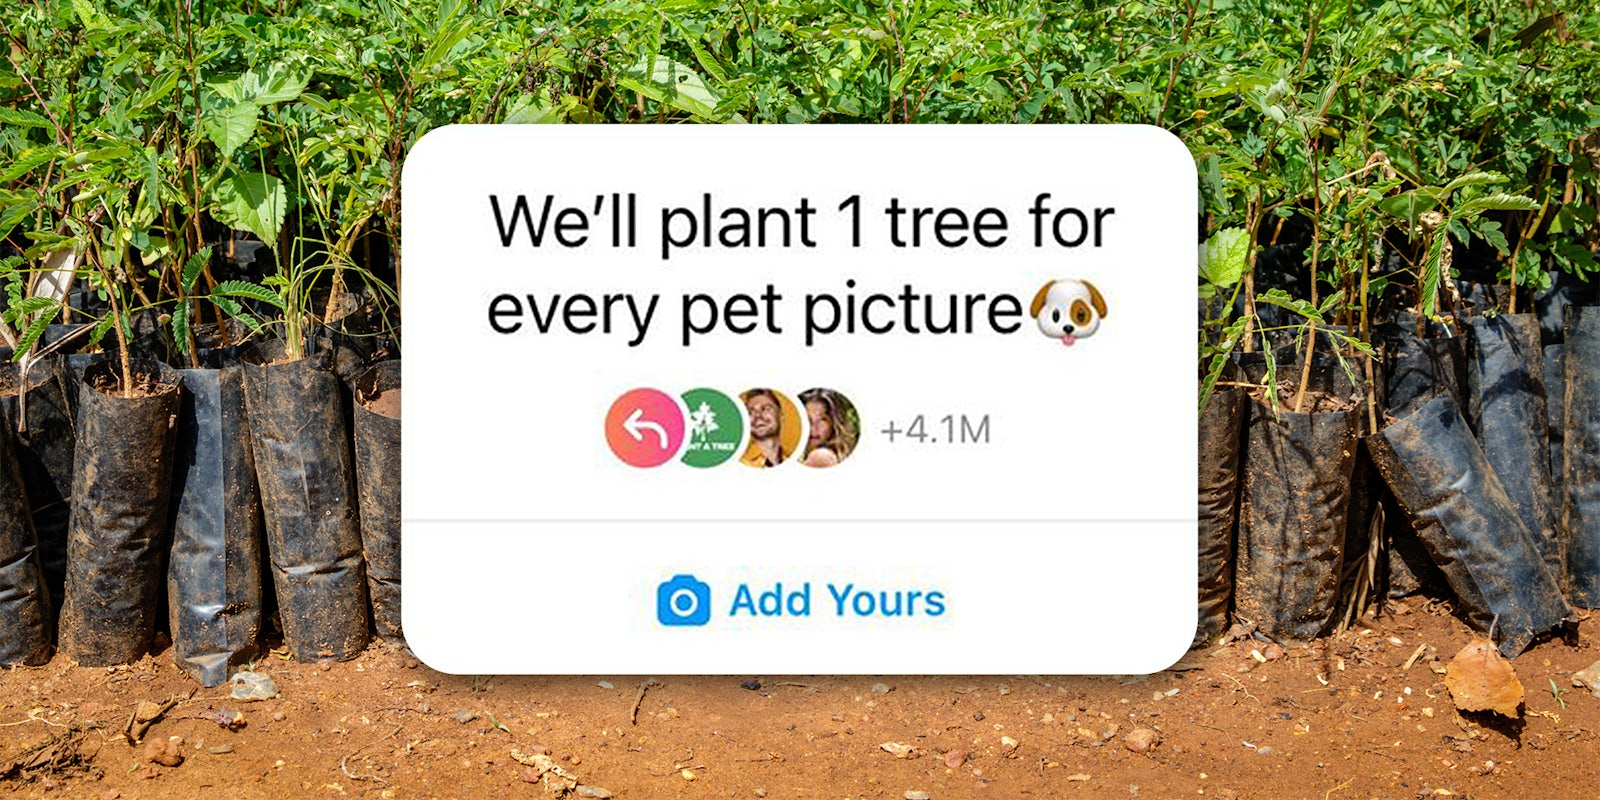 saplings in black plastic bags with instagram overlay 'We'll plant 1 tree for every pet picture'